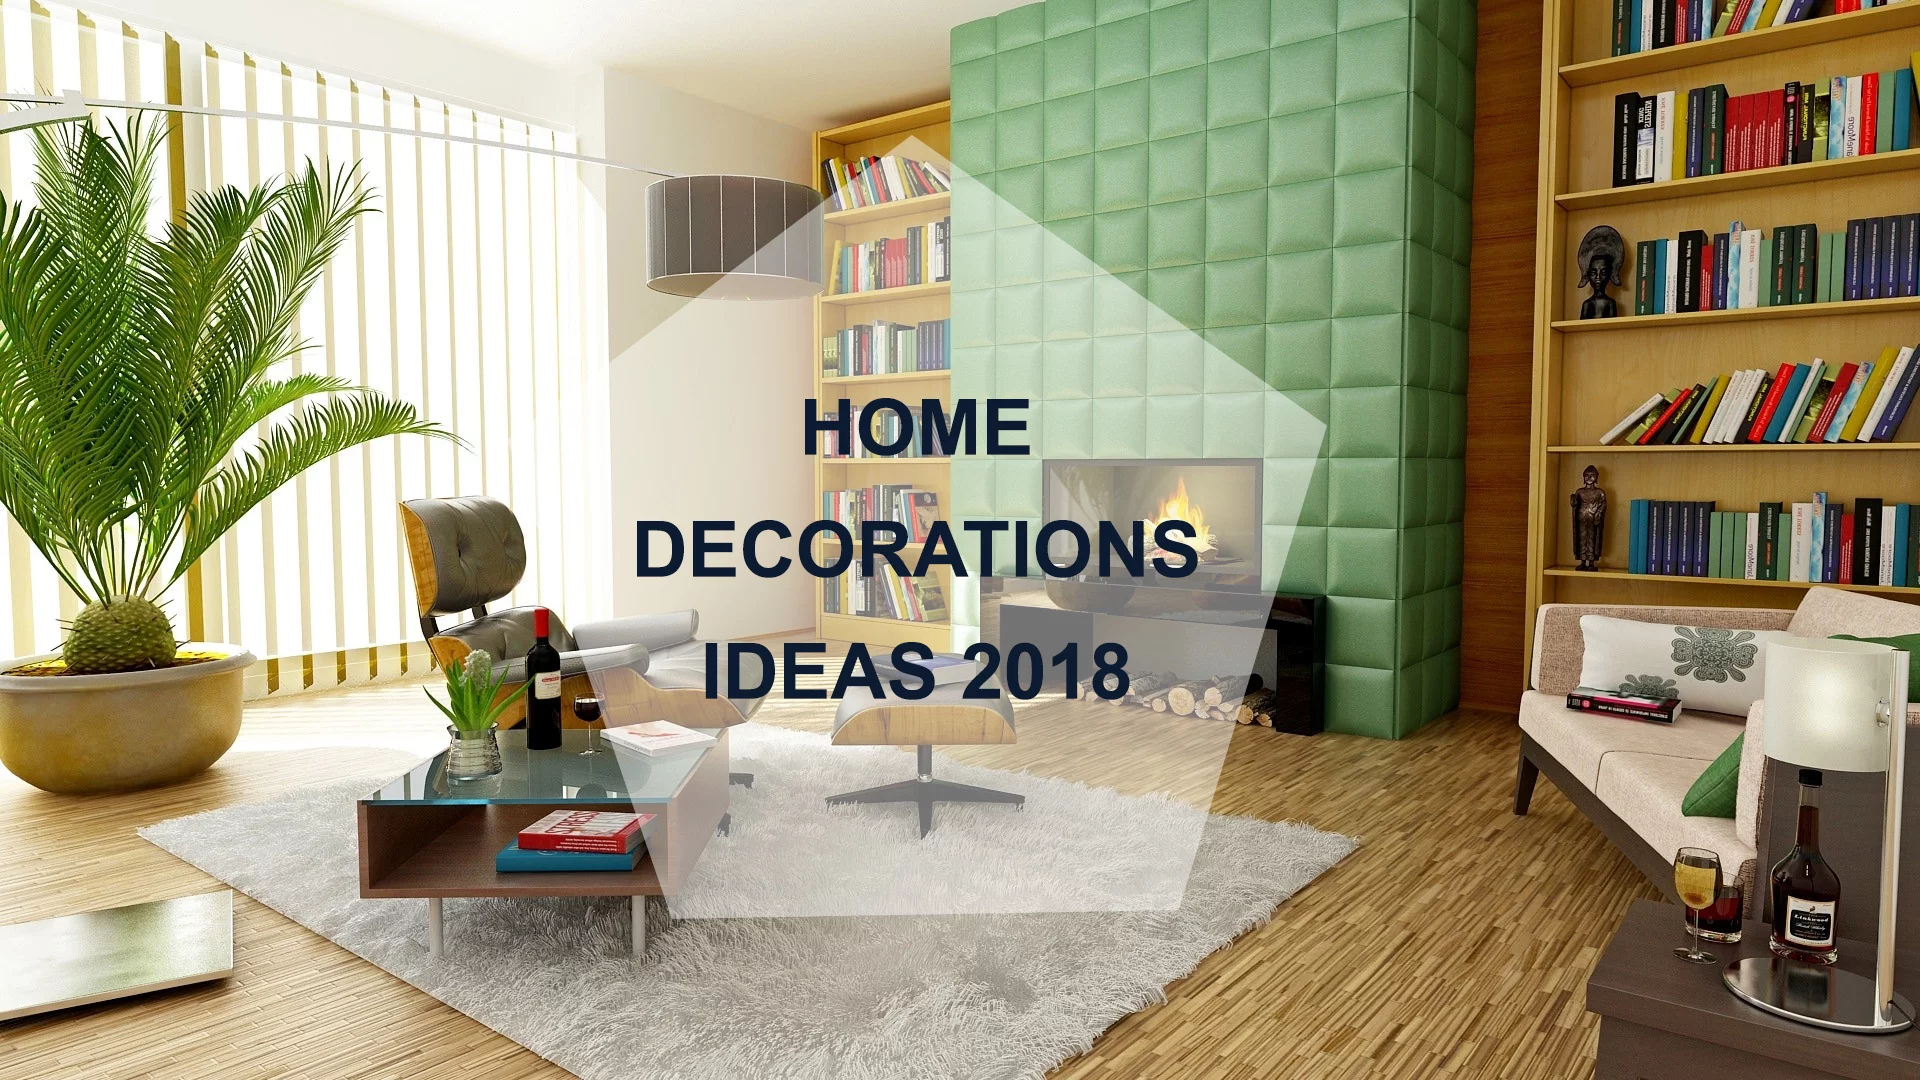 Home decorations ideas 2018